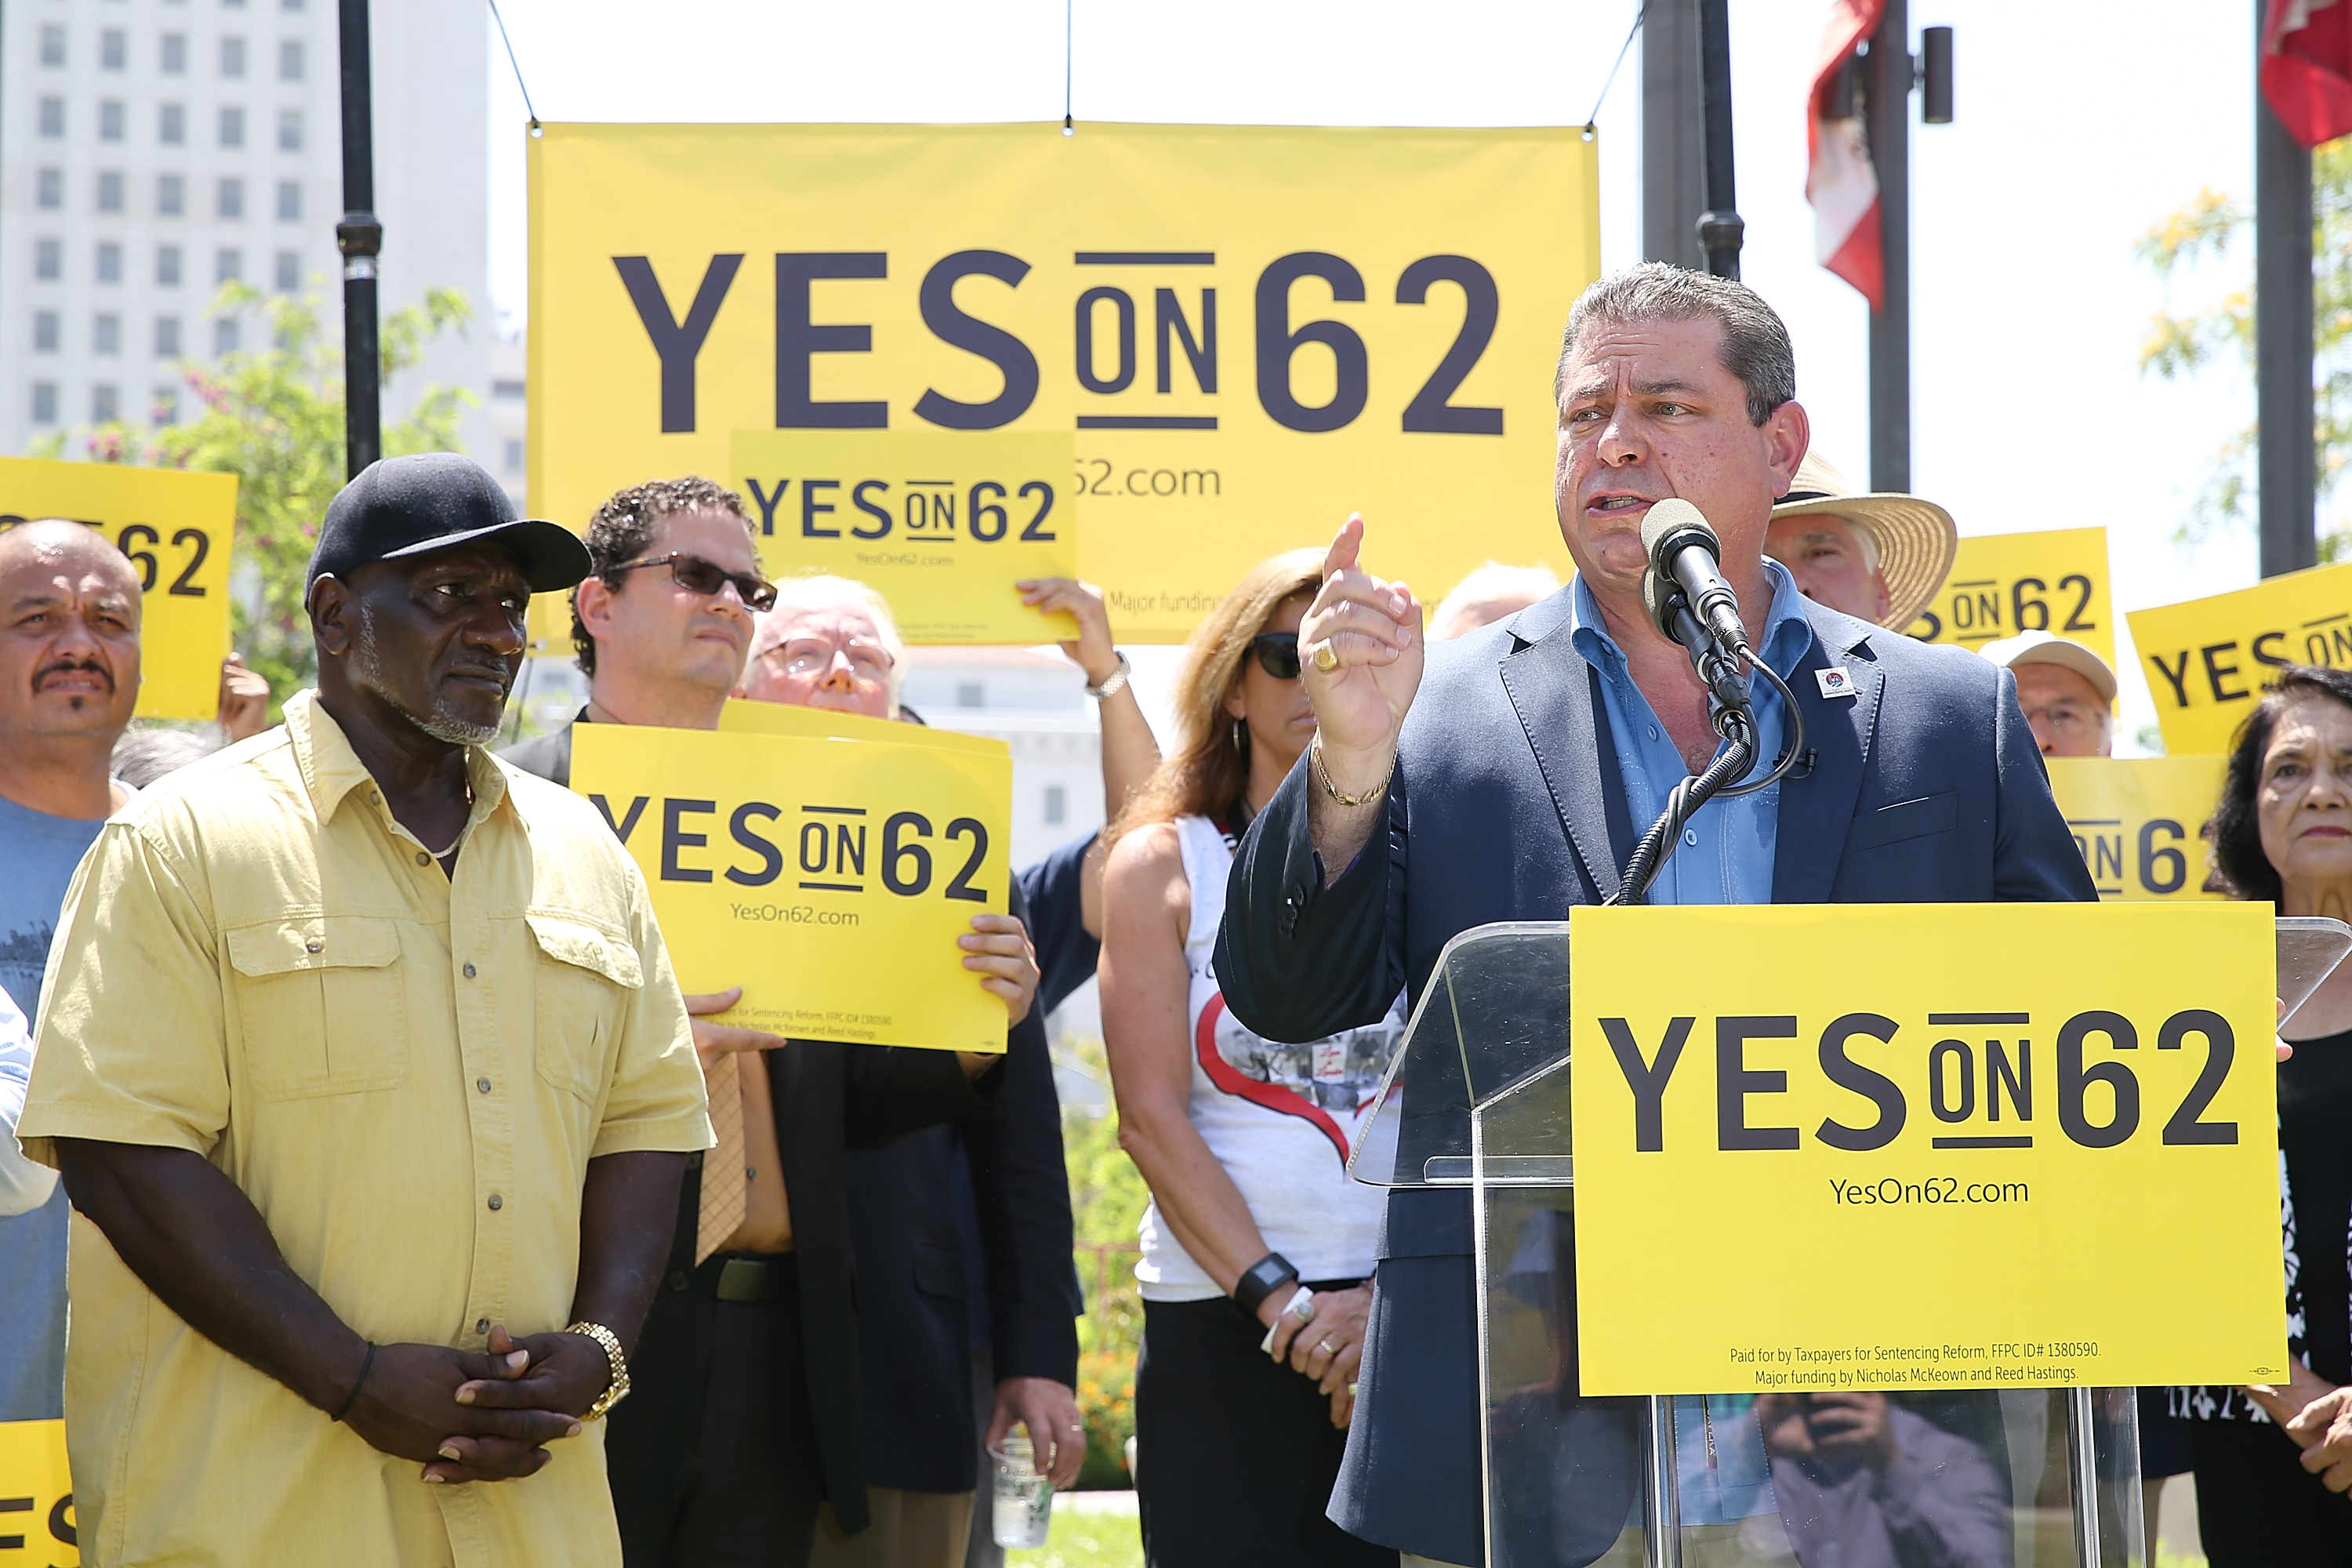 LOS ANGELES, CA - JULY 14: Chairman of the Los Angeles County Democratic Party Eric Bauman (R) speaks onstage during the Yes on Prop 62 Coalition Announcement at Los Angeles Grand Park on July 14, 2016 in Los Angeles, California. Getty Images for Yes on Prop 62/Phillip Faraone